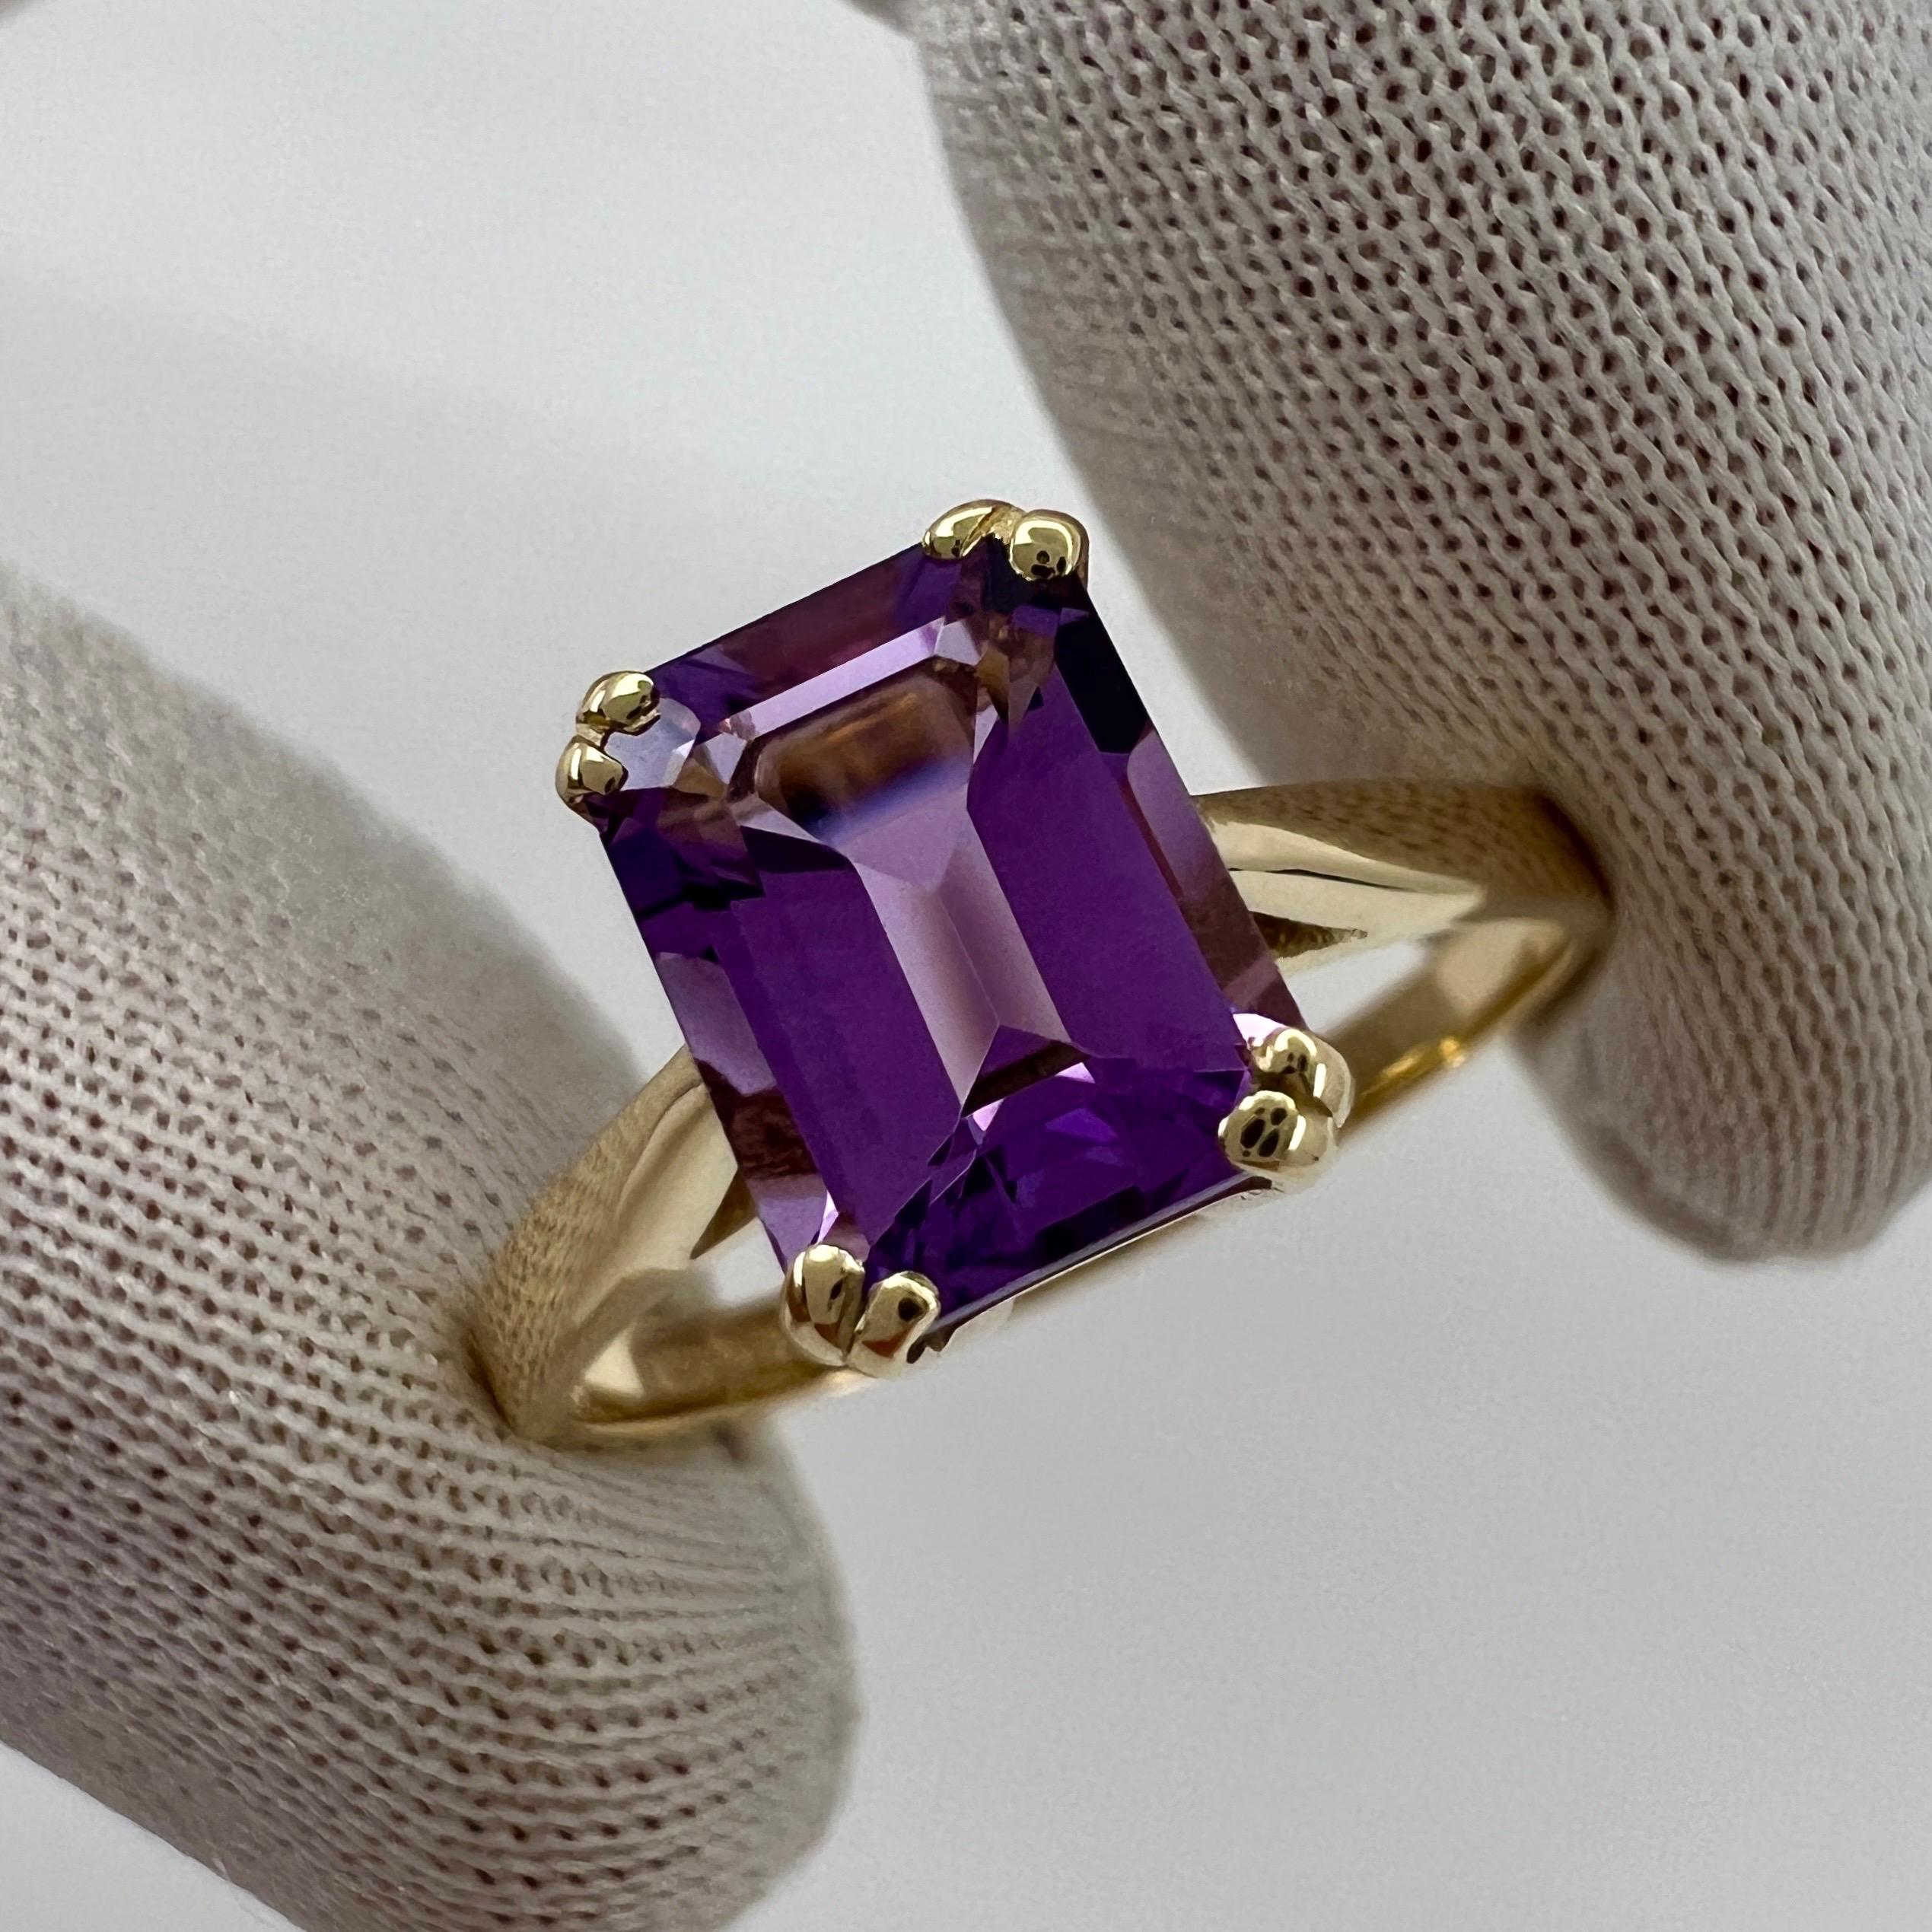 Natural Emerald Octagonal Cut Vivid Purple Amethyst Solitaire Ring.

1.60 Carat amethyst with a stunning vivid purple colour and excellent clarity, very clean stone. 
Also has an excellent quality emerald octagonal cut which shows the fine colour to